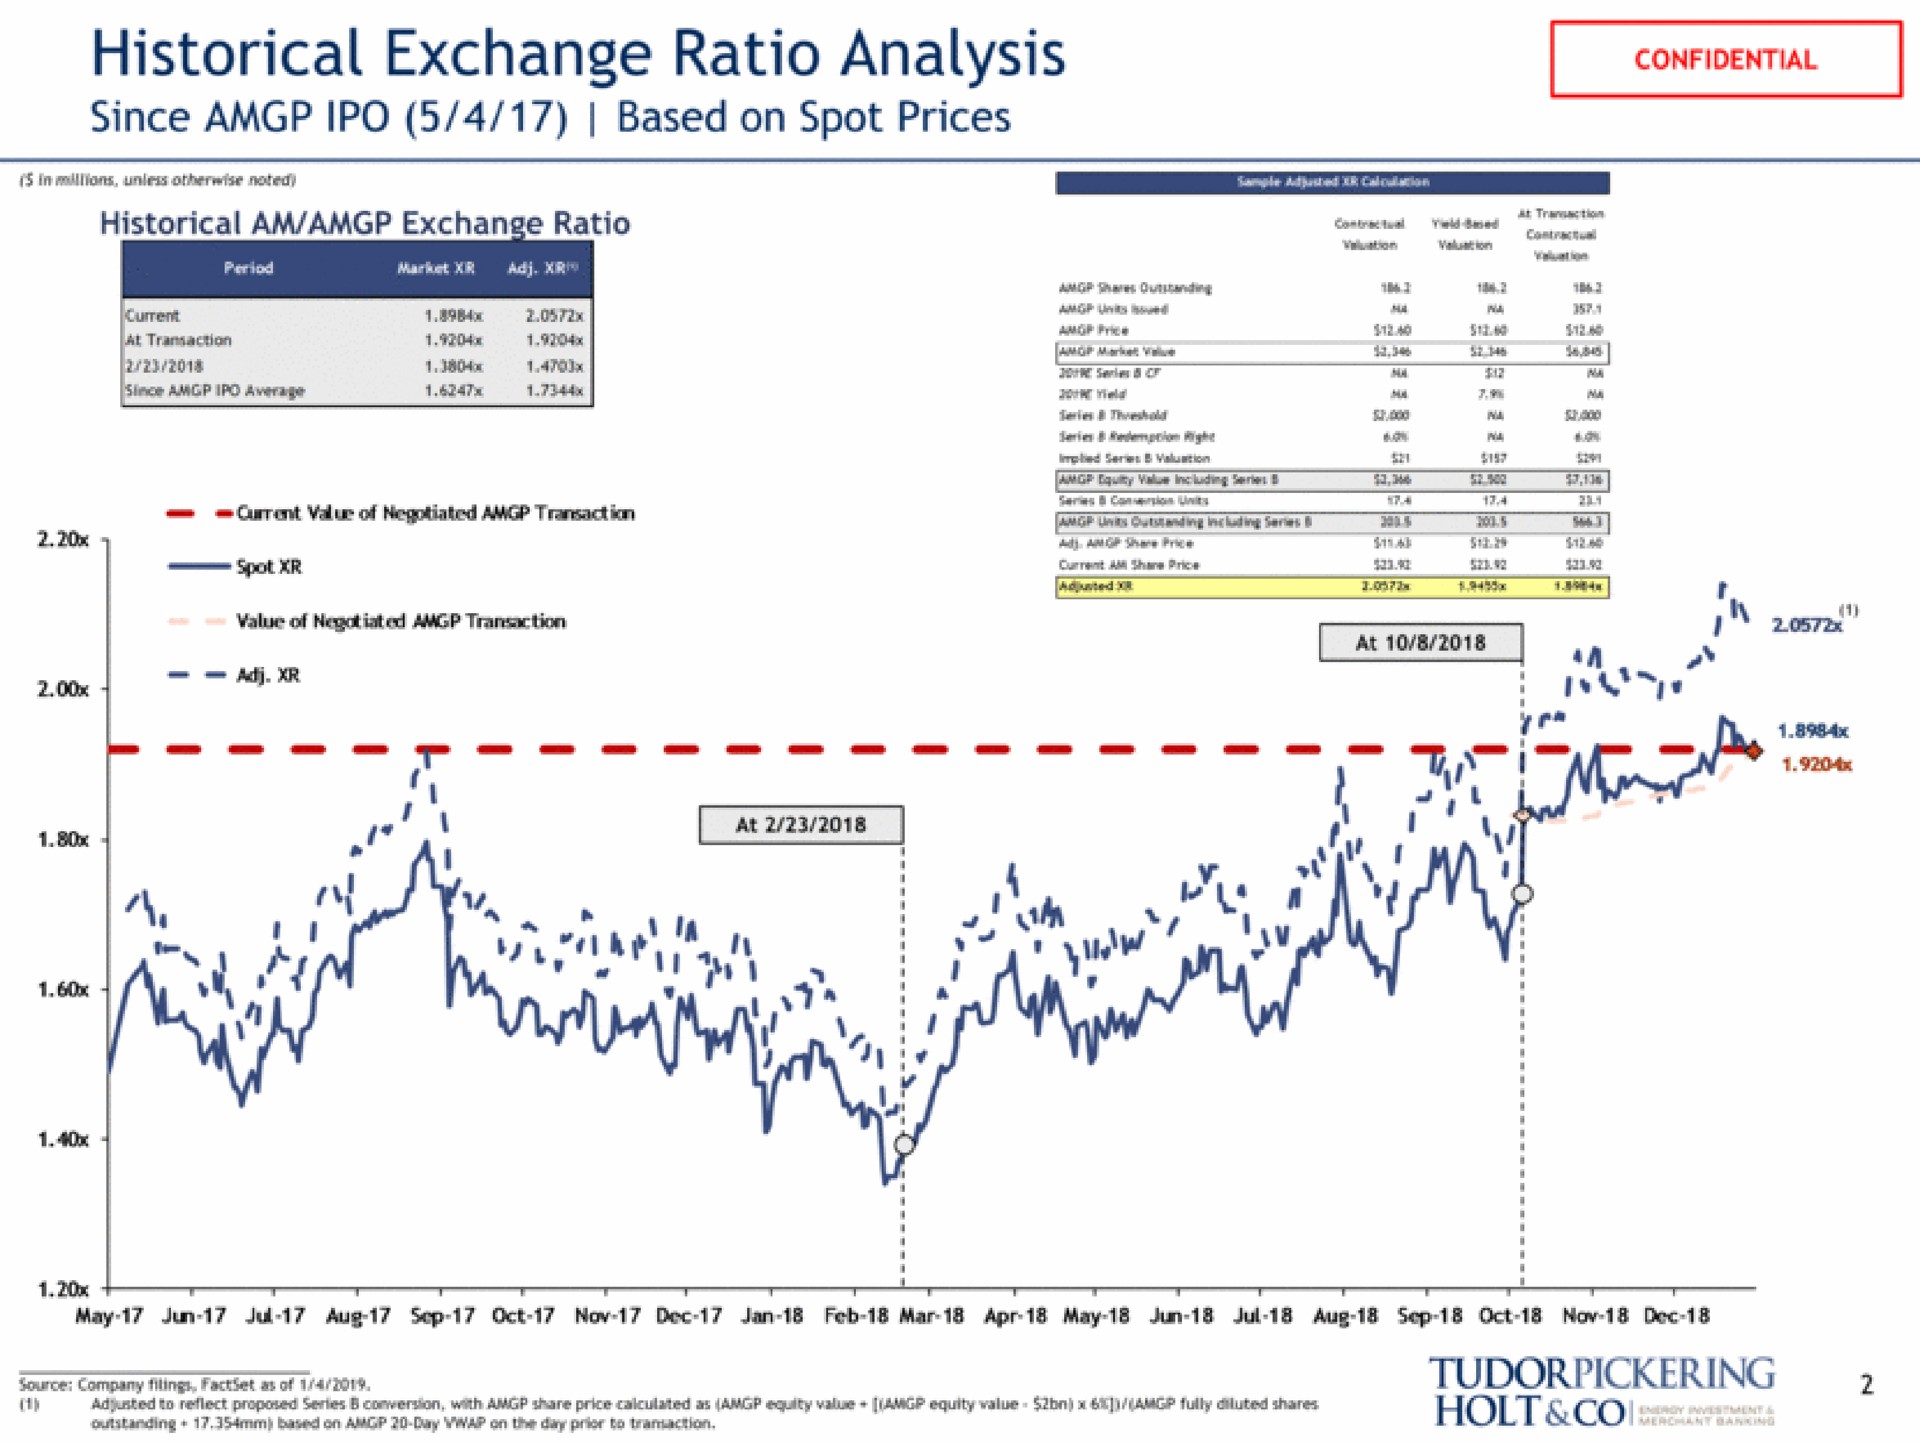 historical exchange ratio analysis since based on spot prices vee yew source company wing an of | Tudor, Pickering, Holt & Co